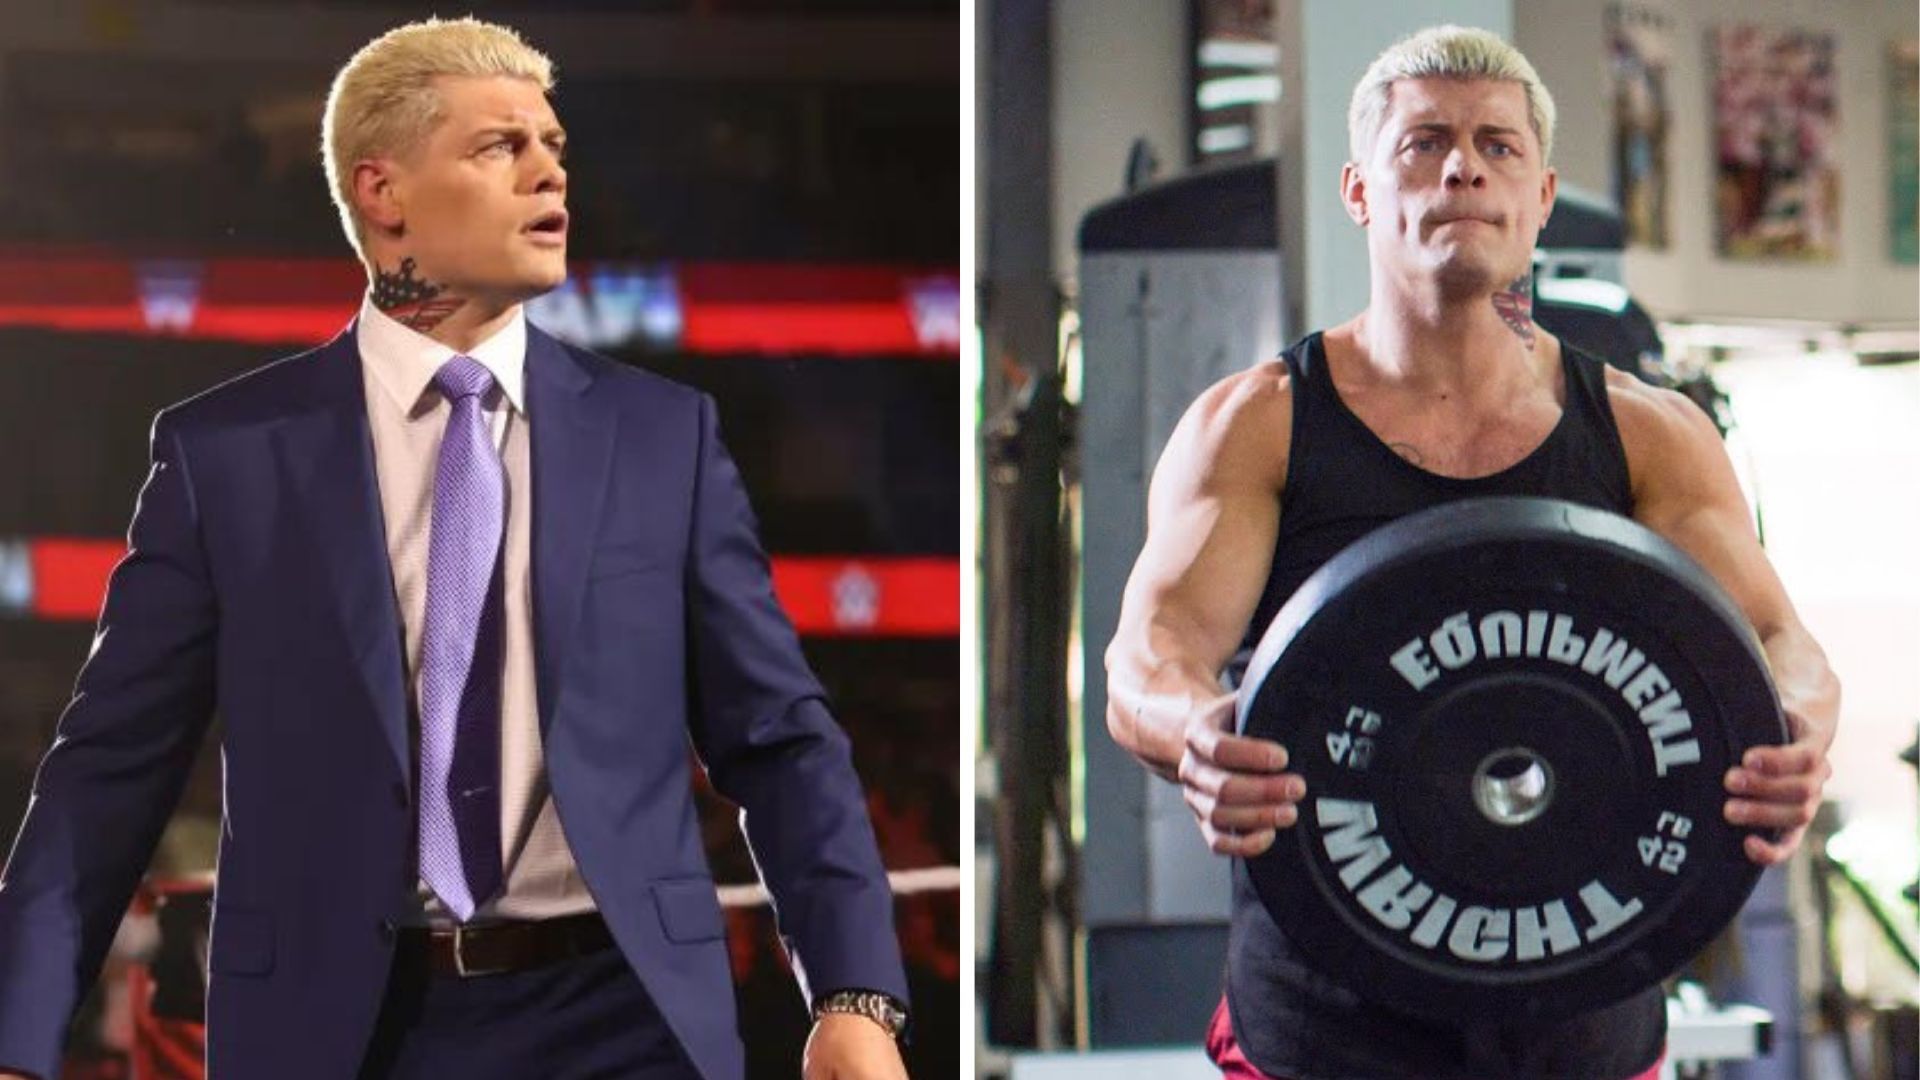 Cody Rhodes is on his way back to WWE after suffering an injury